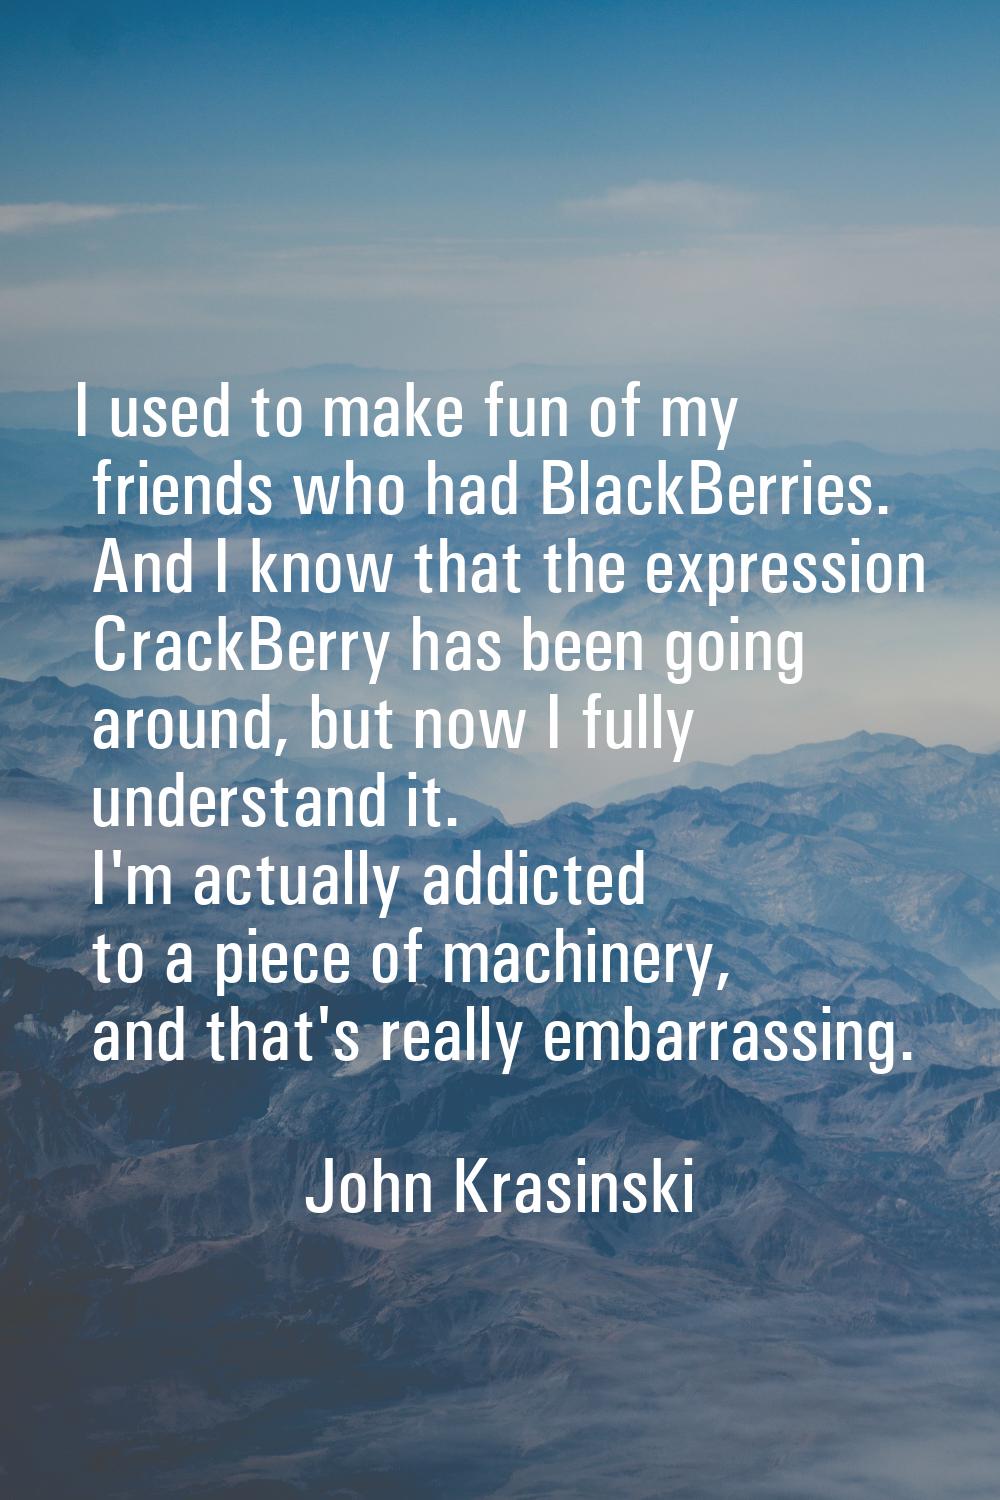 I used to make fun of my friends who had BlackBerries. And I know that the expression CrackBerry ha